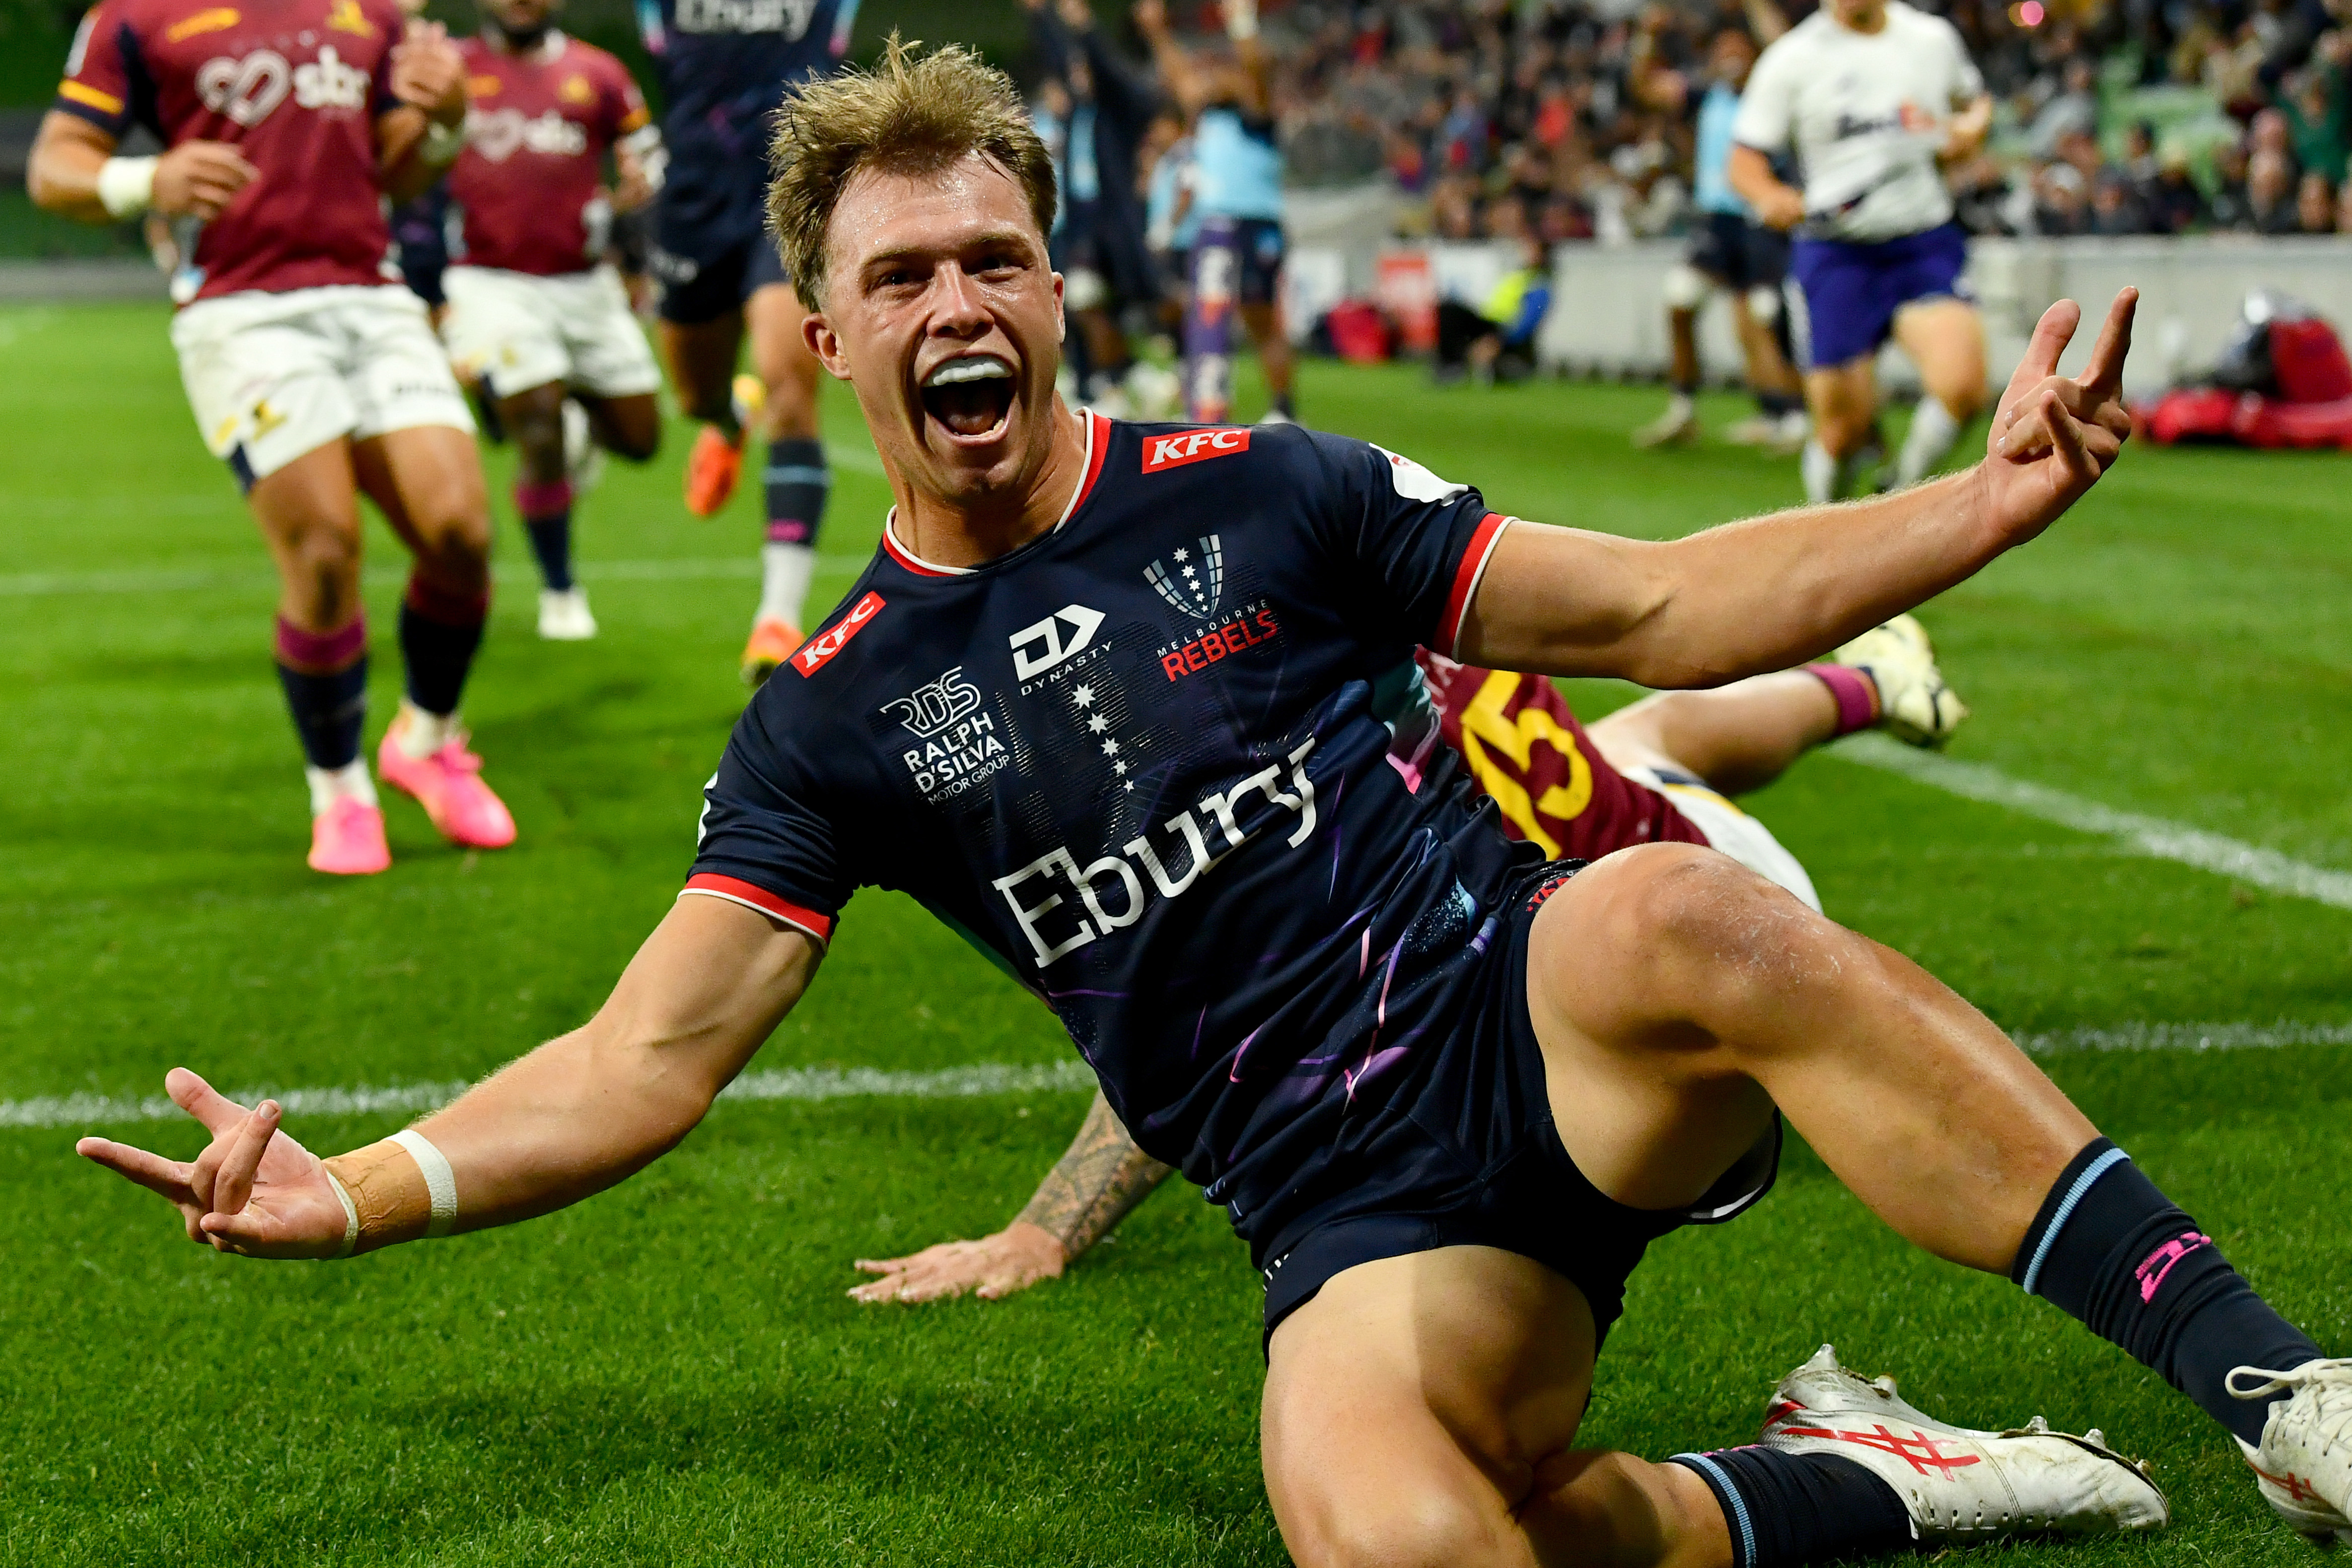 Darby Lancaster of the Rebels celebrates scoring a try.